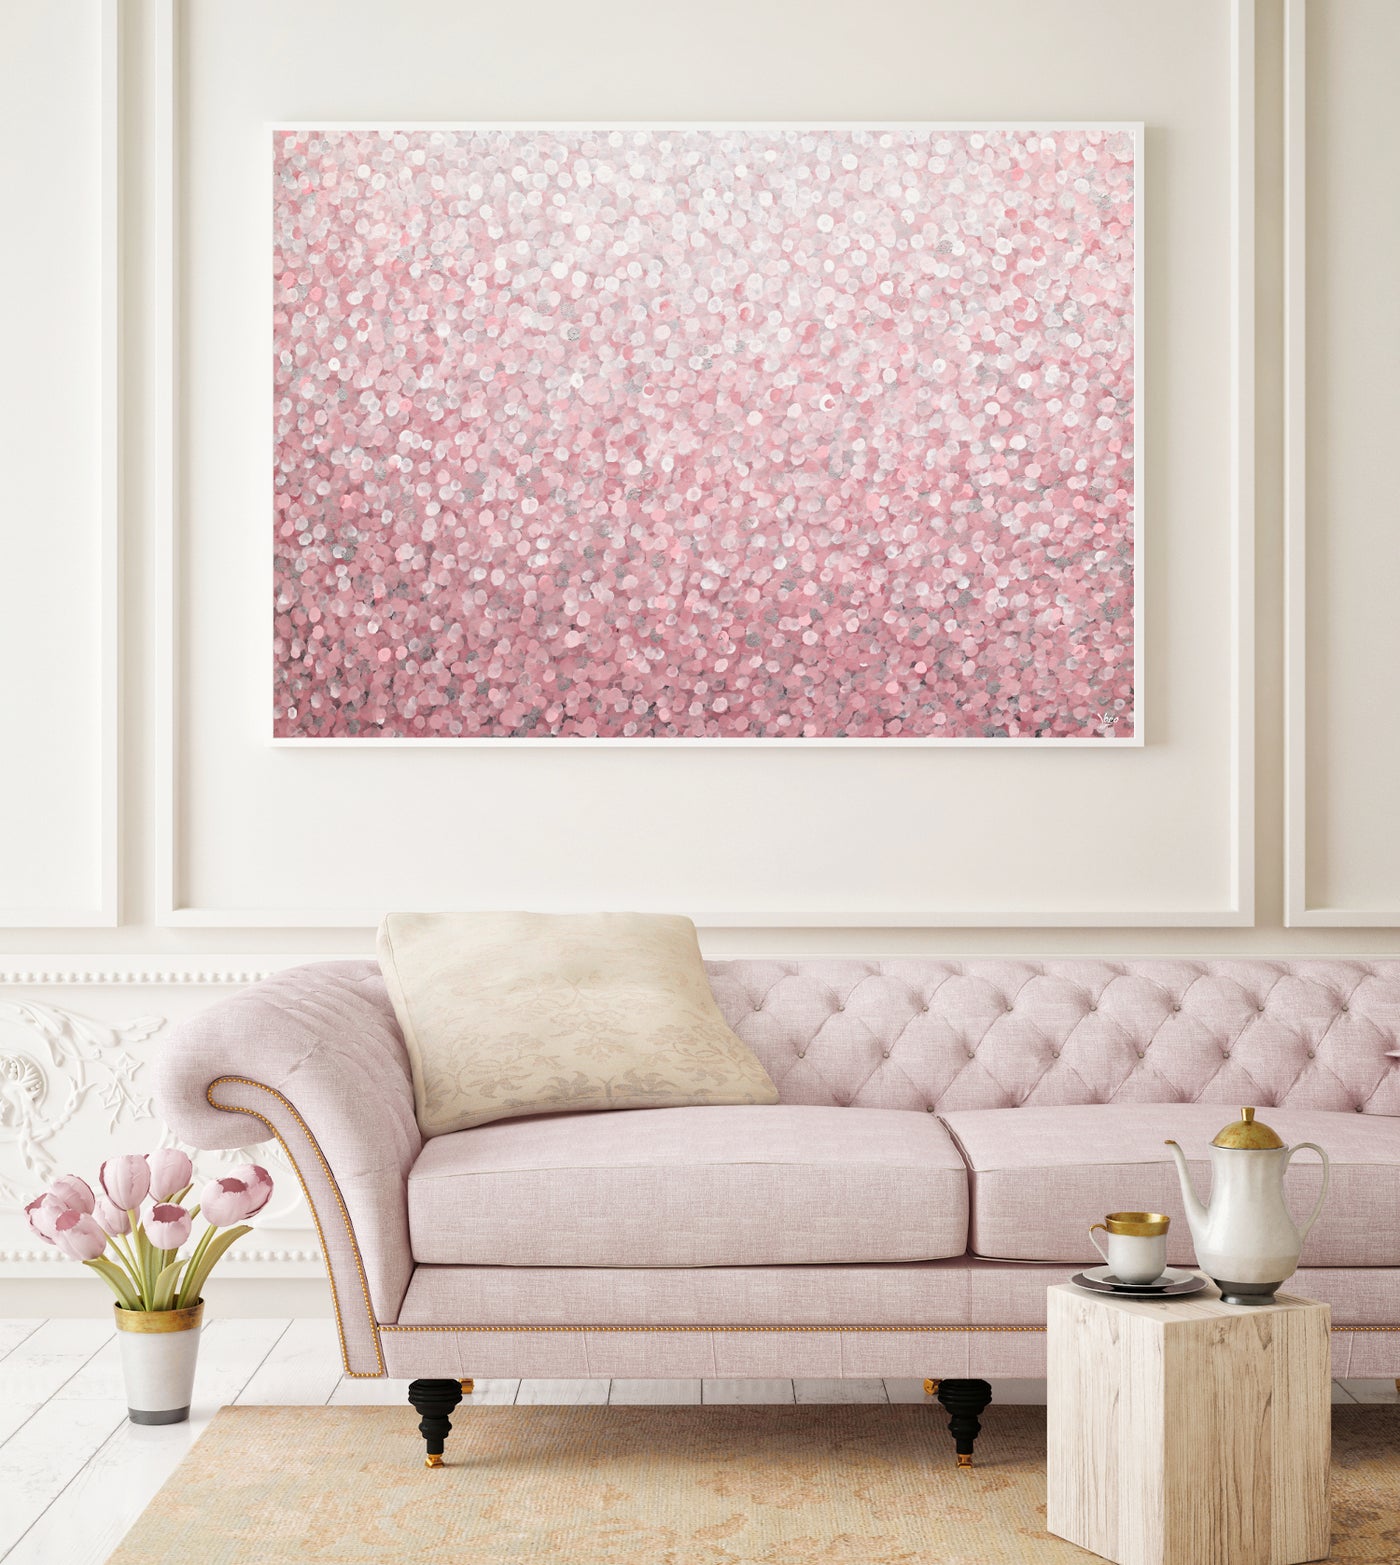 Abstract Wall Art, Contemporary Pink Dot Art Print, Ready-to-Hang Canvas, Extra Large Wall Decor | arrtopia